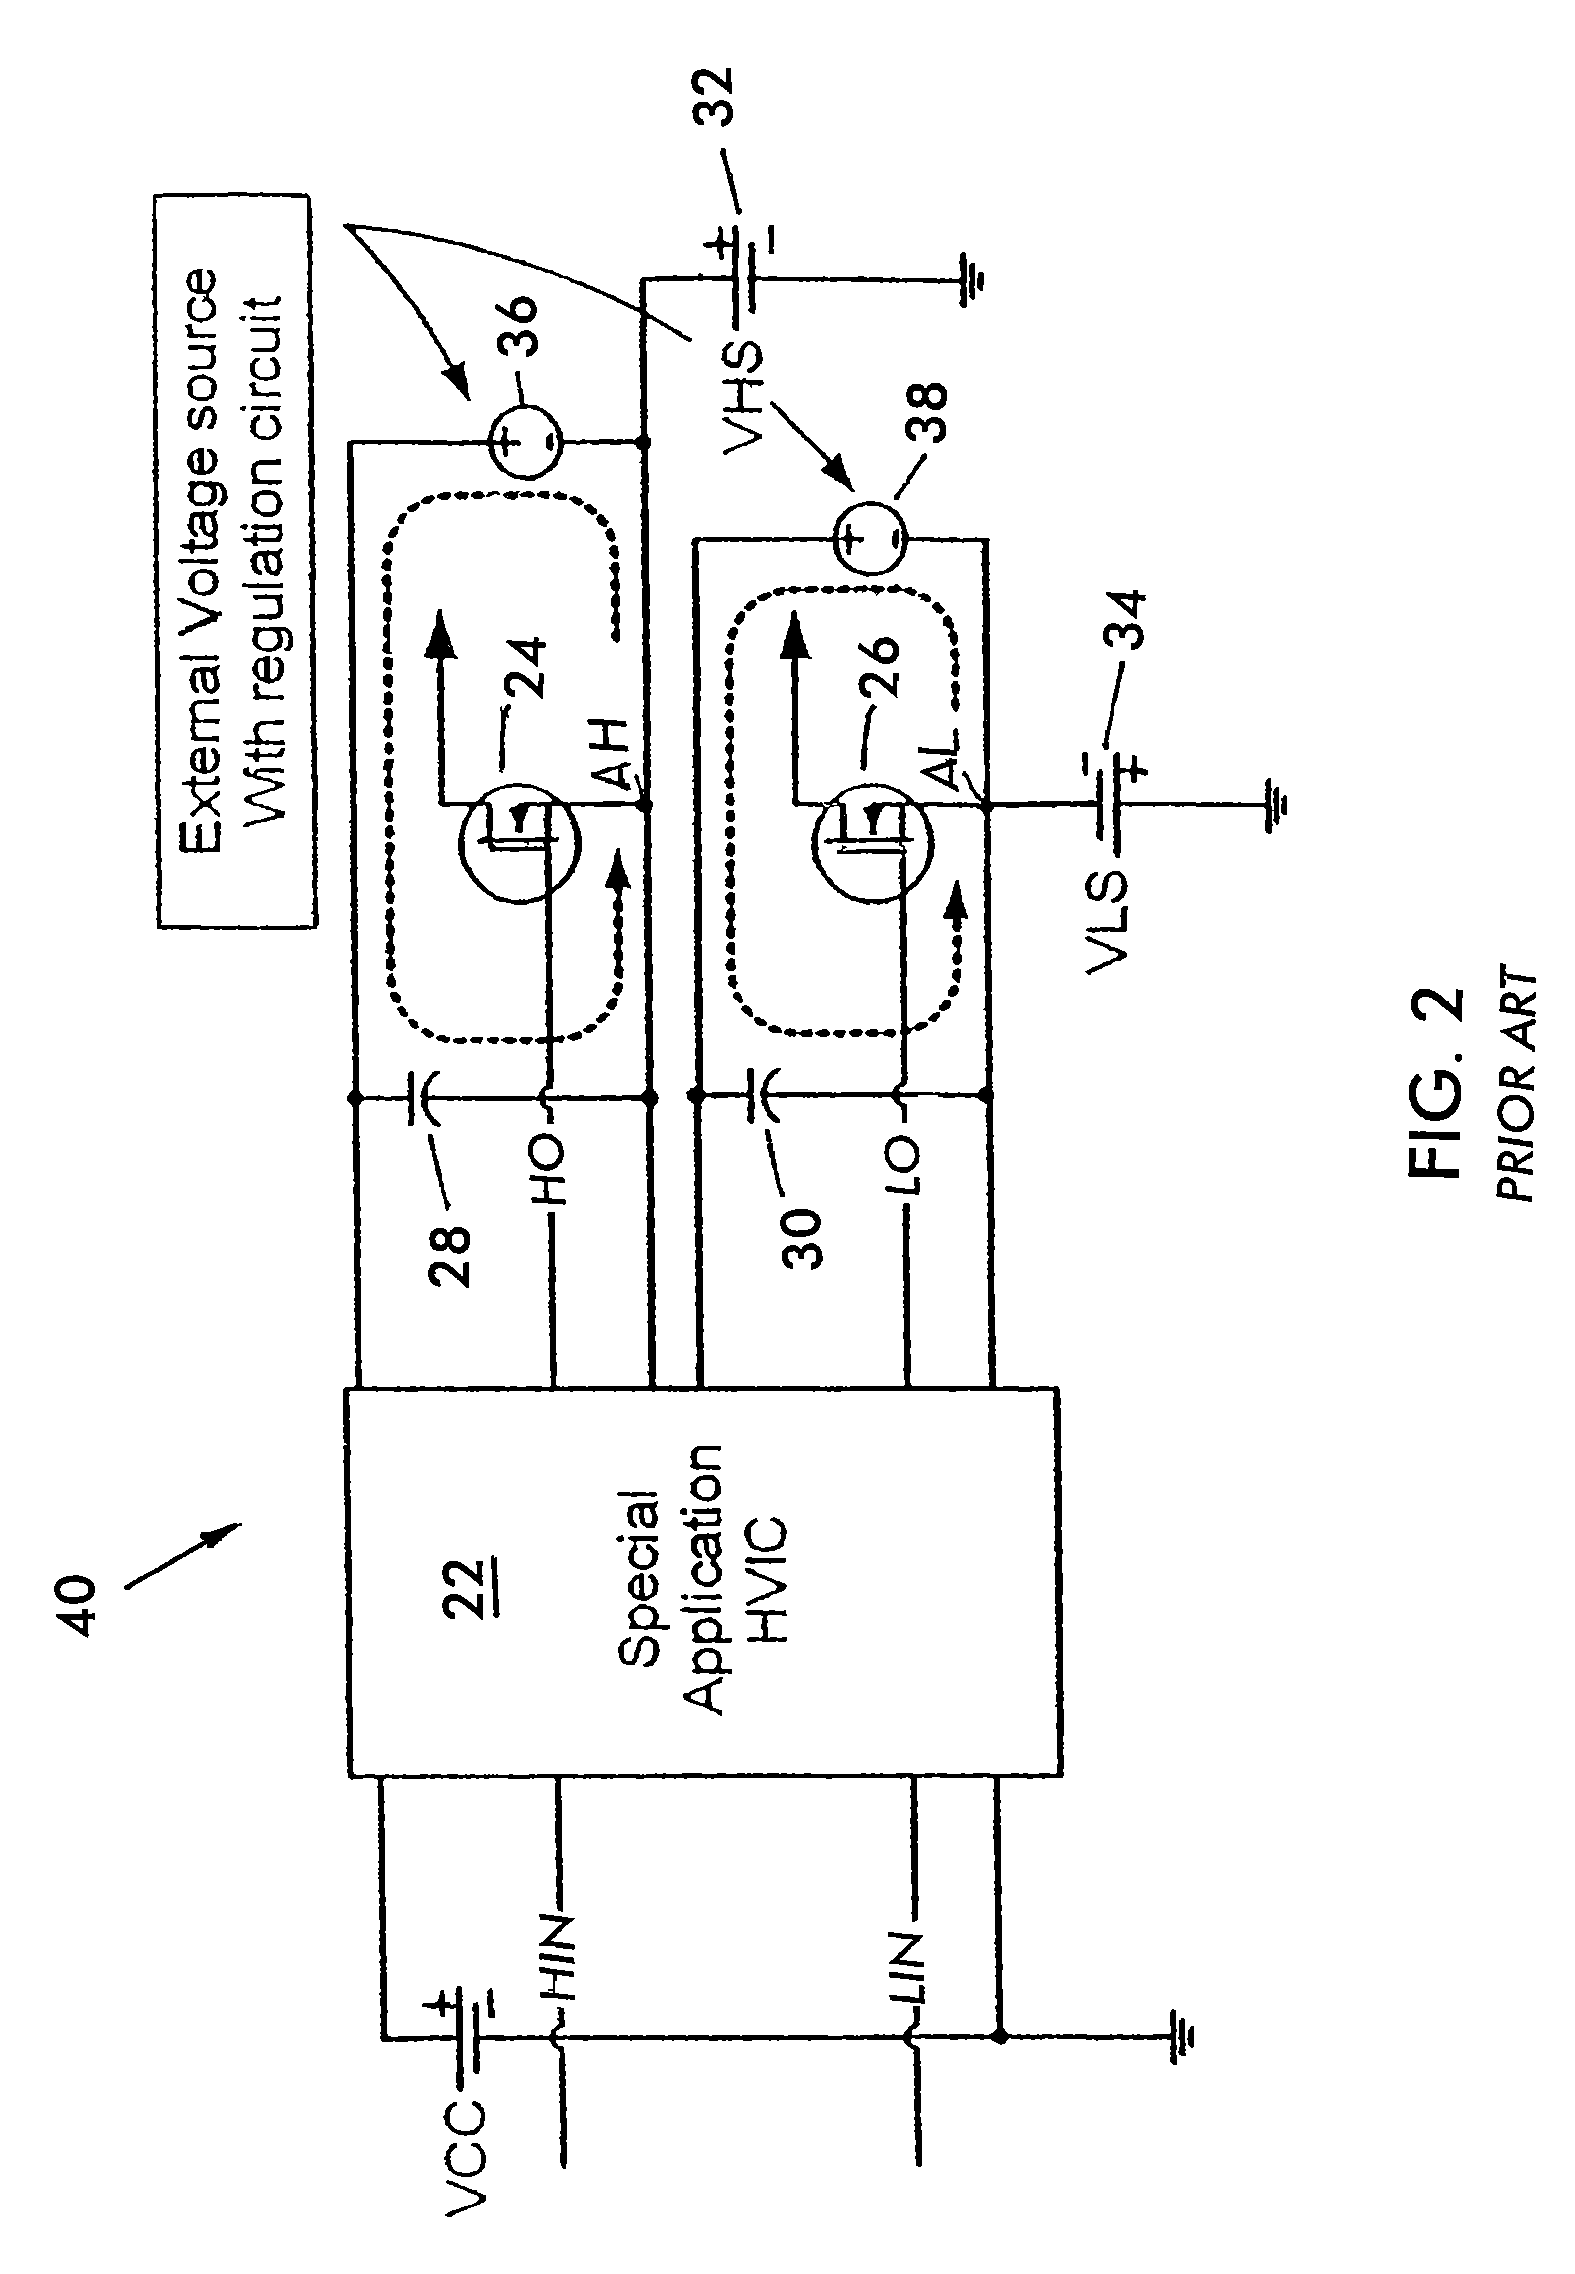 High voltage gate driver IC (HVIC) with internal charge pumping voltage source